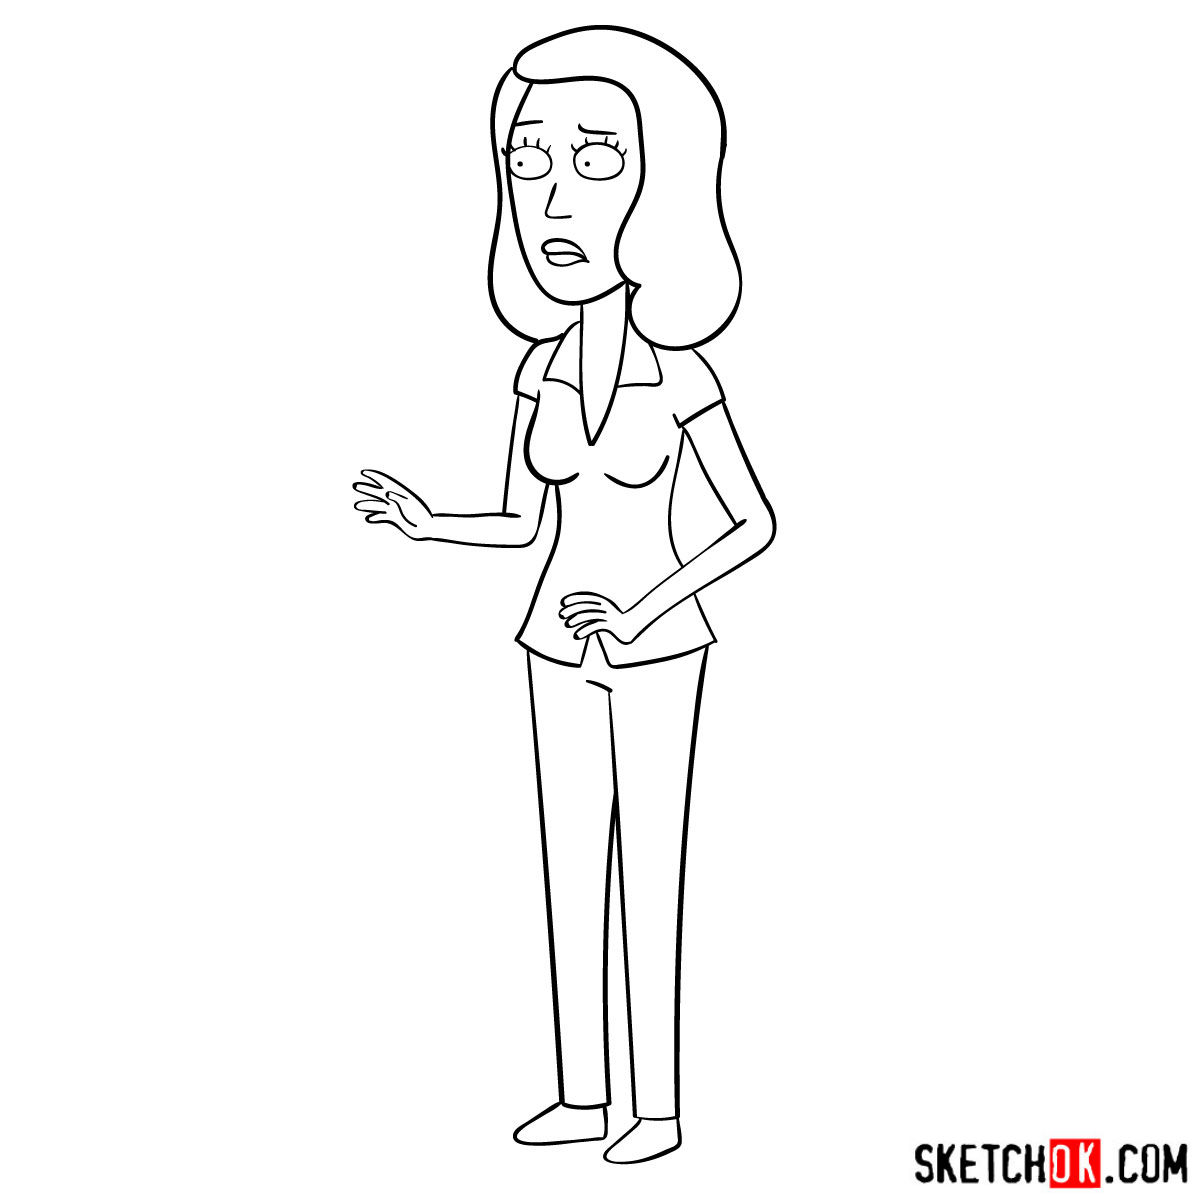 How to draw Beth Smith from Rick and Morty - step 10